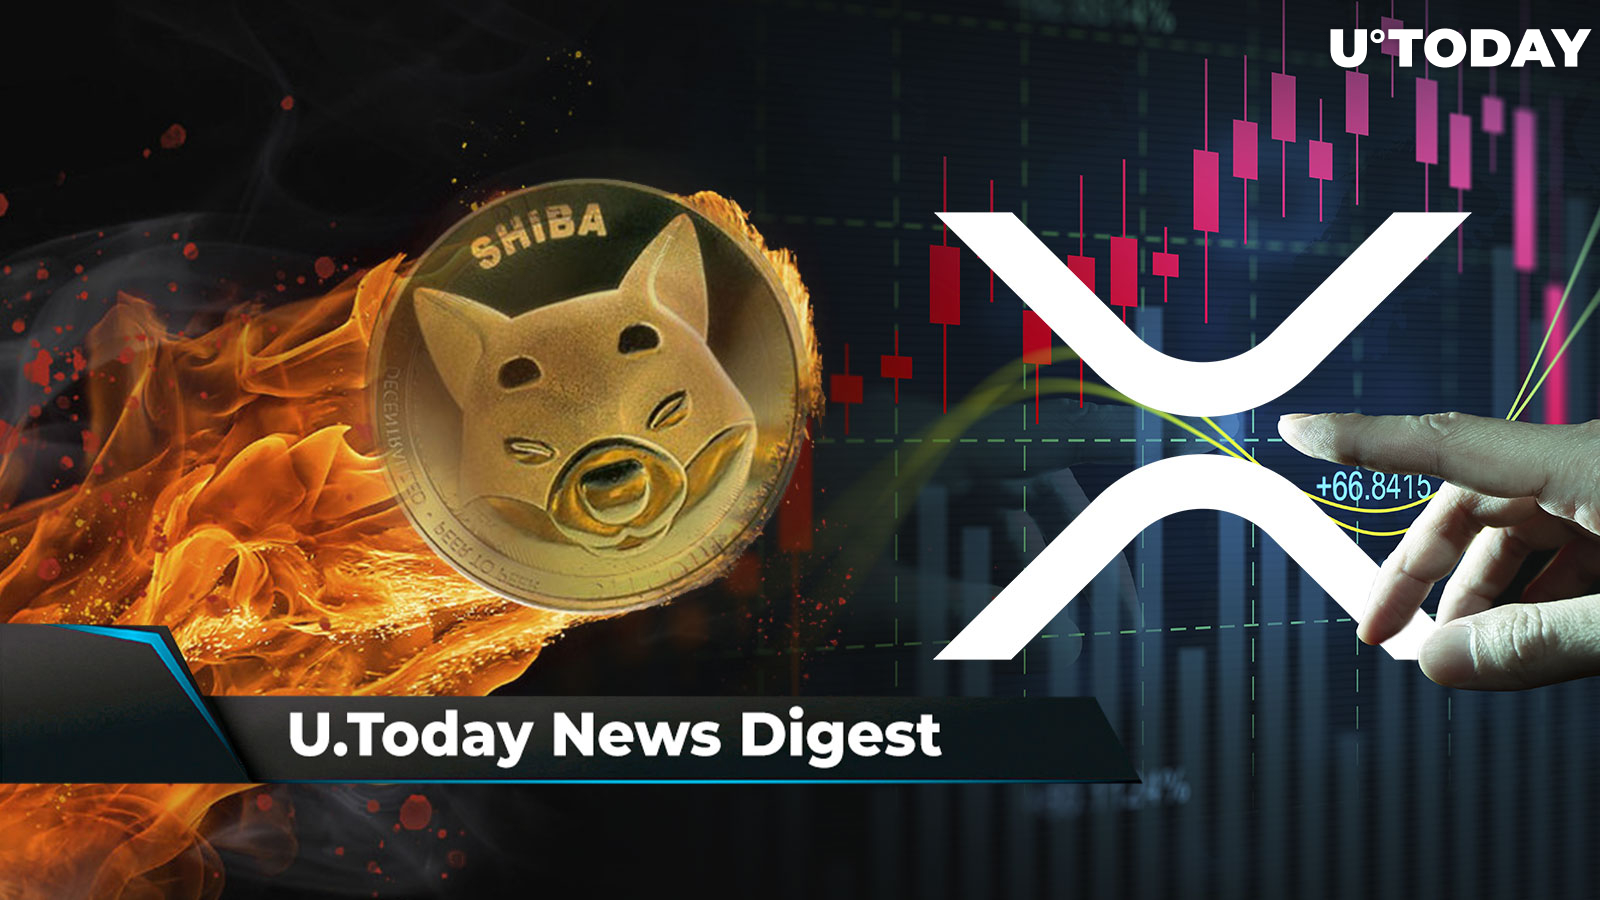 Shibarium Reaches ATH in Daily Transactions, XRP Hits Massive Milestone, SHIB Burn Rate Jumps 2,080%: Crypto News Digest by U.Today